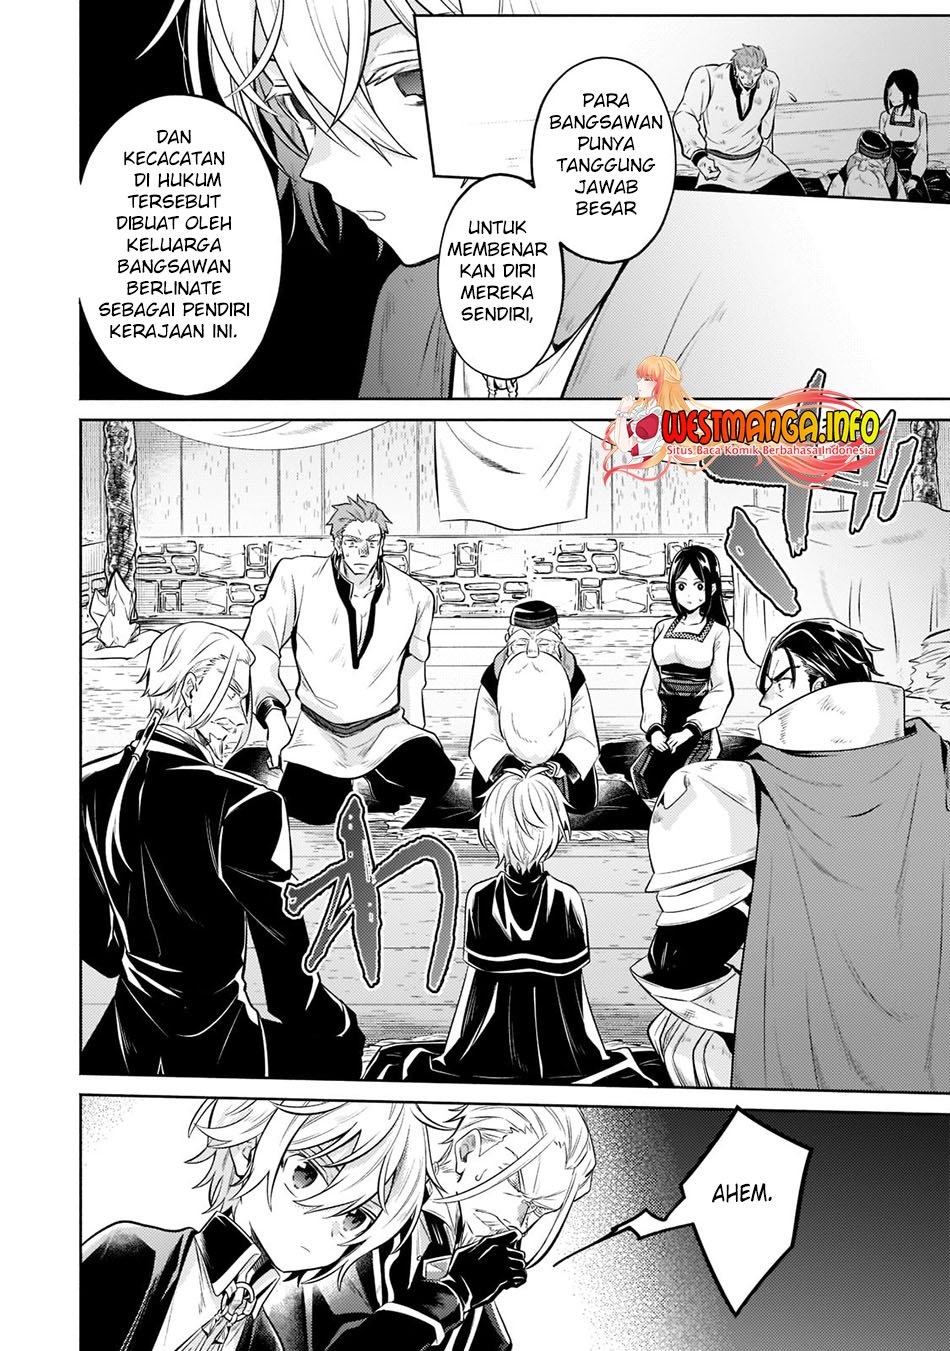 Fun Territory Defense Of The Easy-Going Lord ~The Nameless Village Is Made Into The Strongest Fortified City By Production Magic~ Chapter 07 - 187